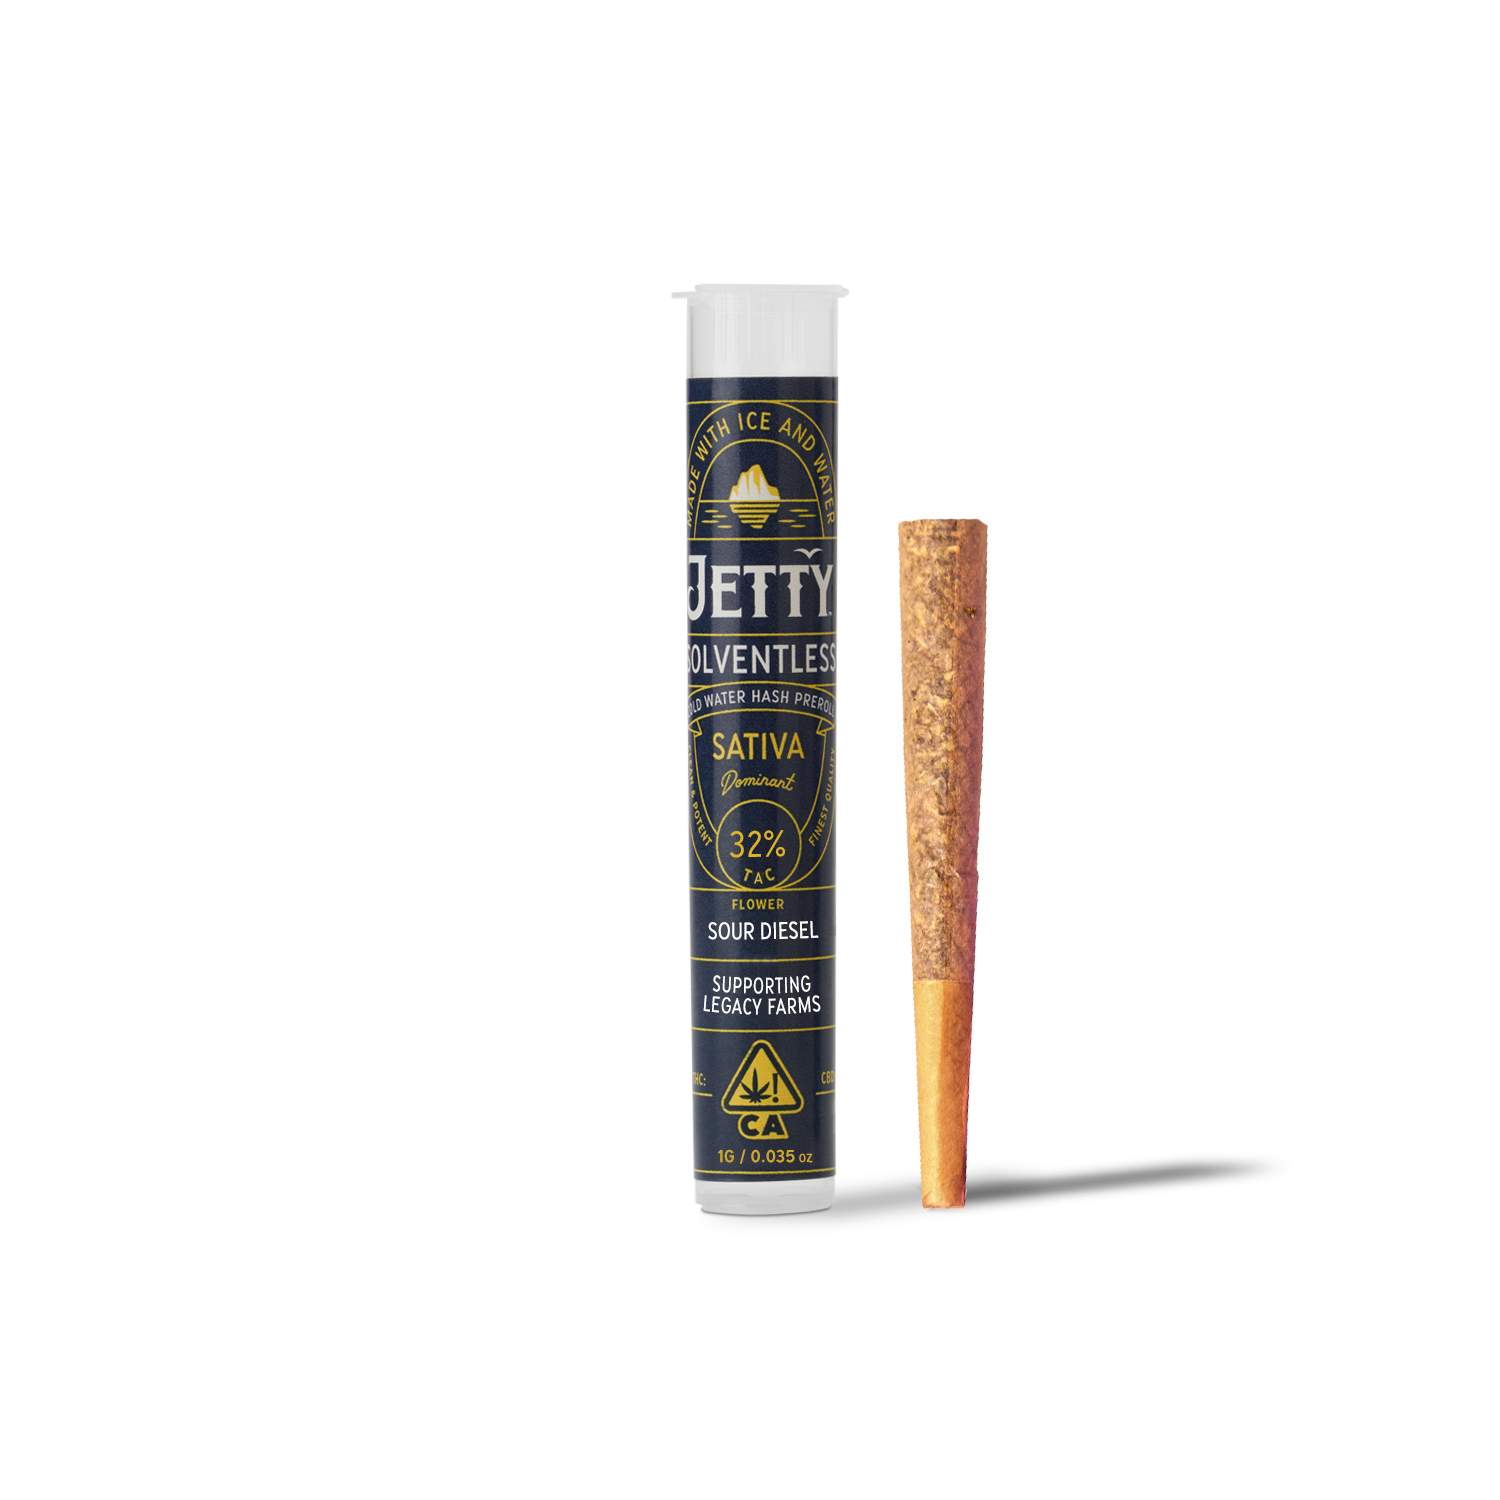 A photograph of Jetty 1g Solventless Preroll Sour Diesel